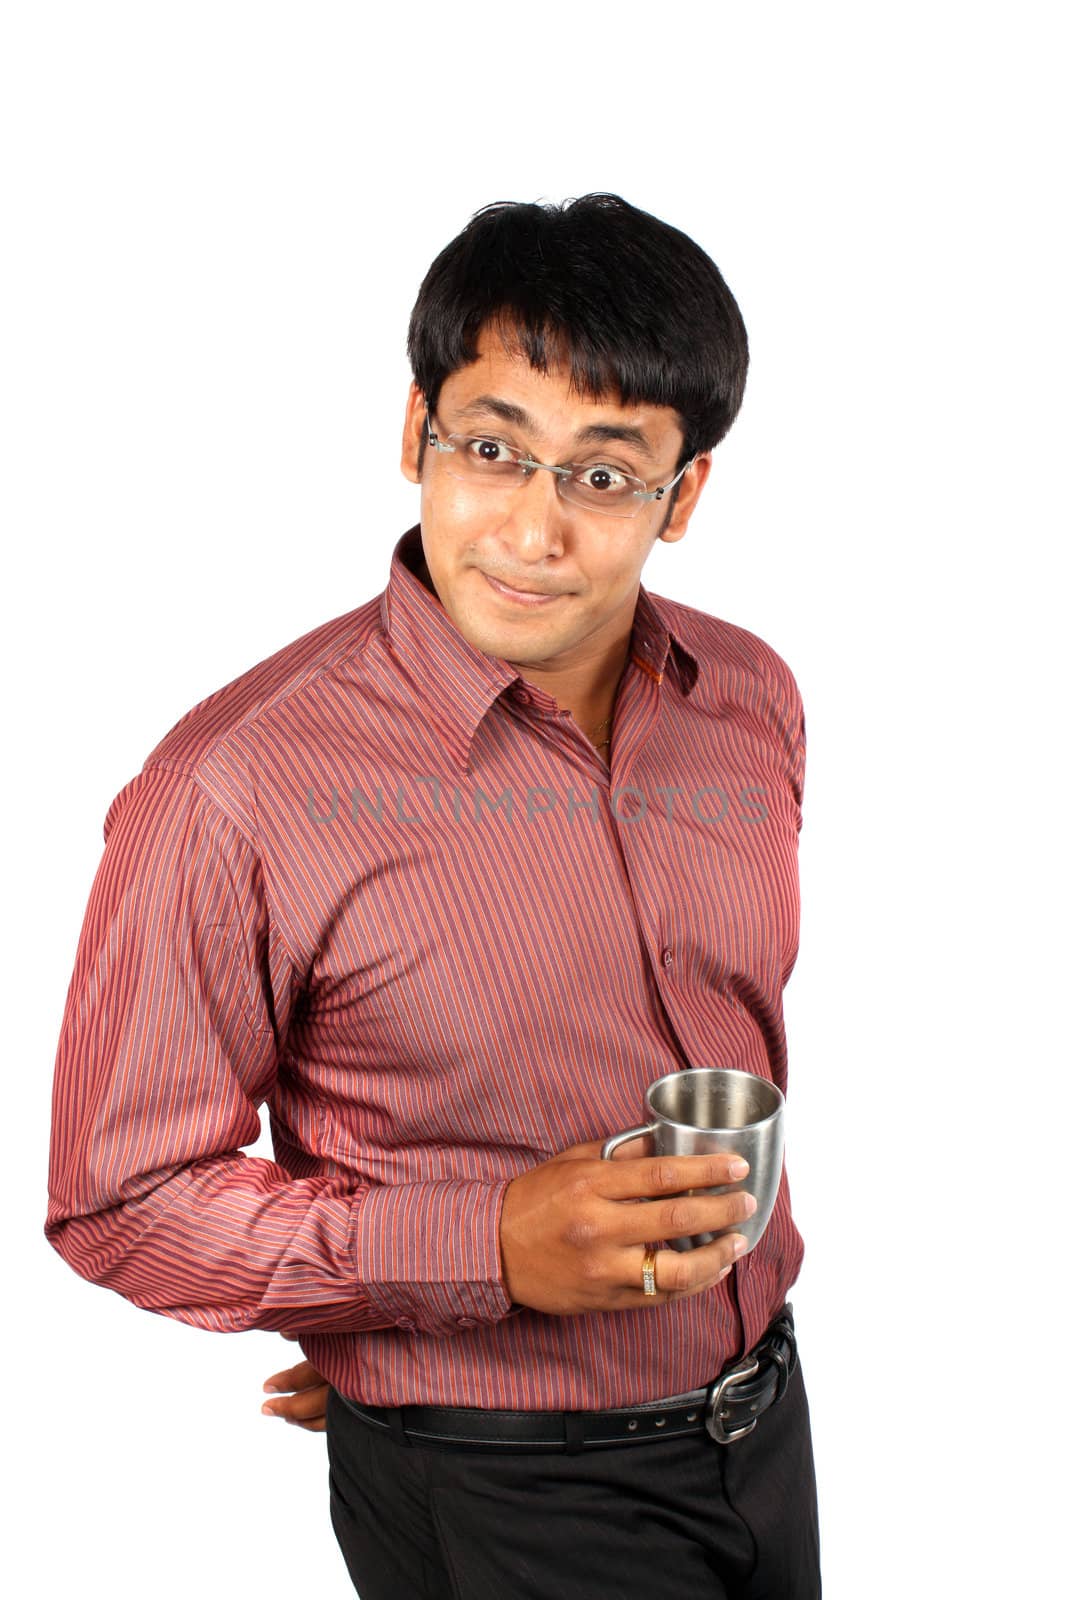 An Indian man with a coffee cup acting funny, on white studio background.